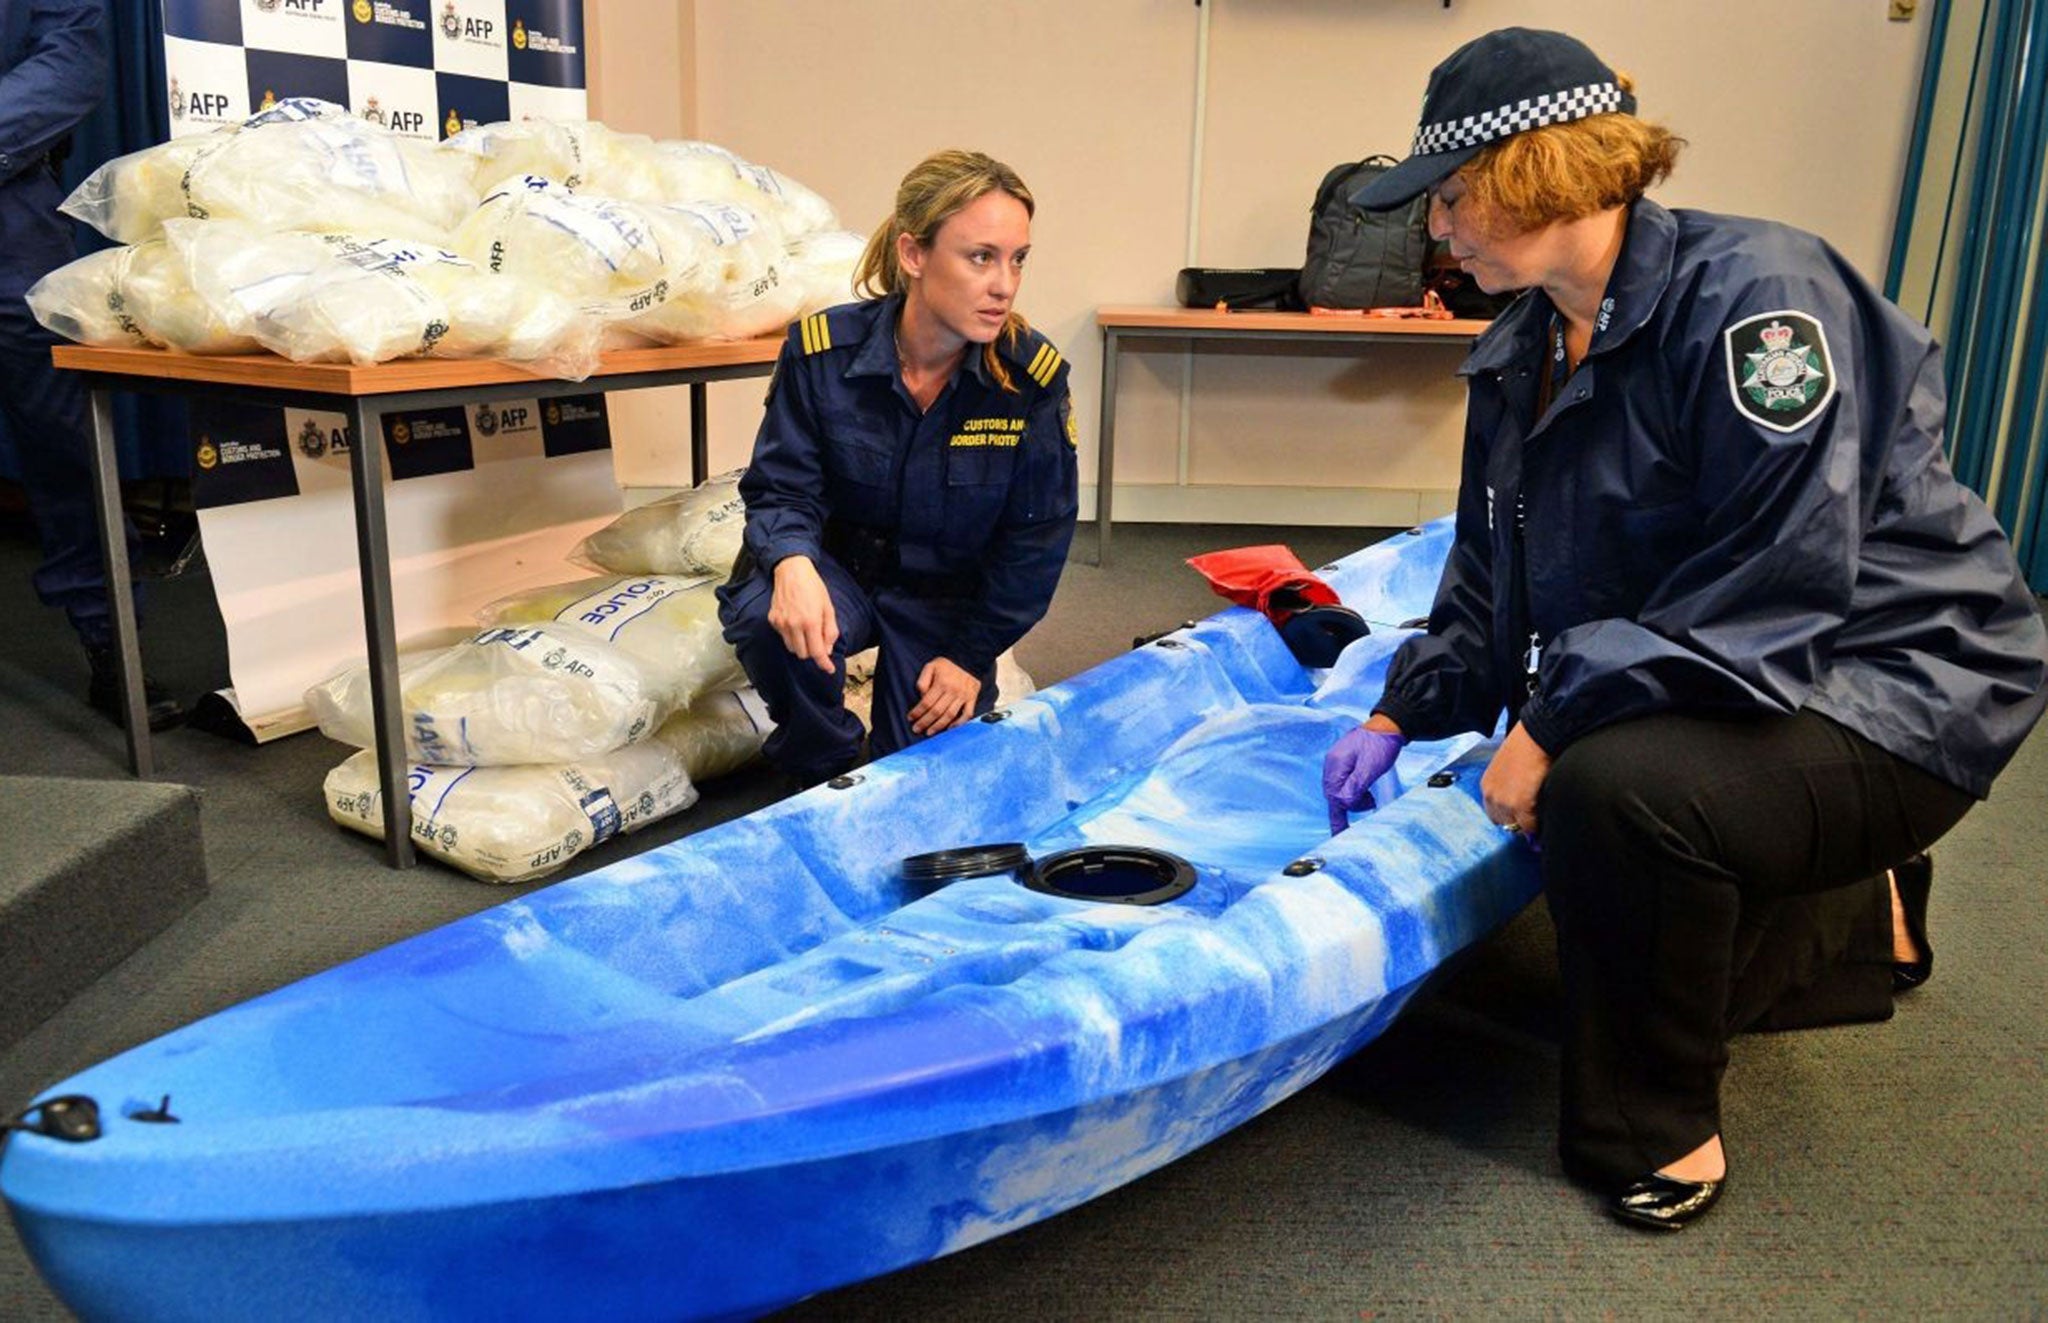 An Australian Customs officer and an Australian Federal Police officer inspect one of the 27 kayaks seized